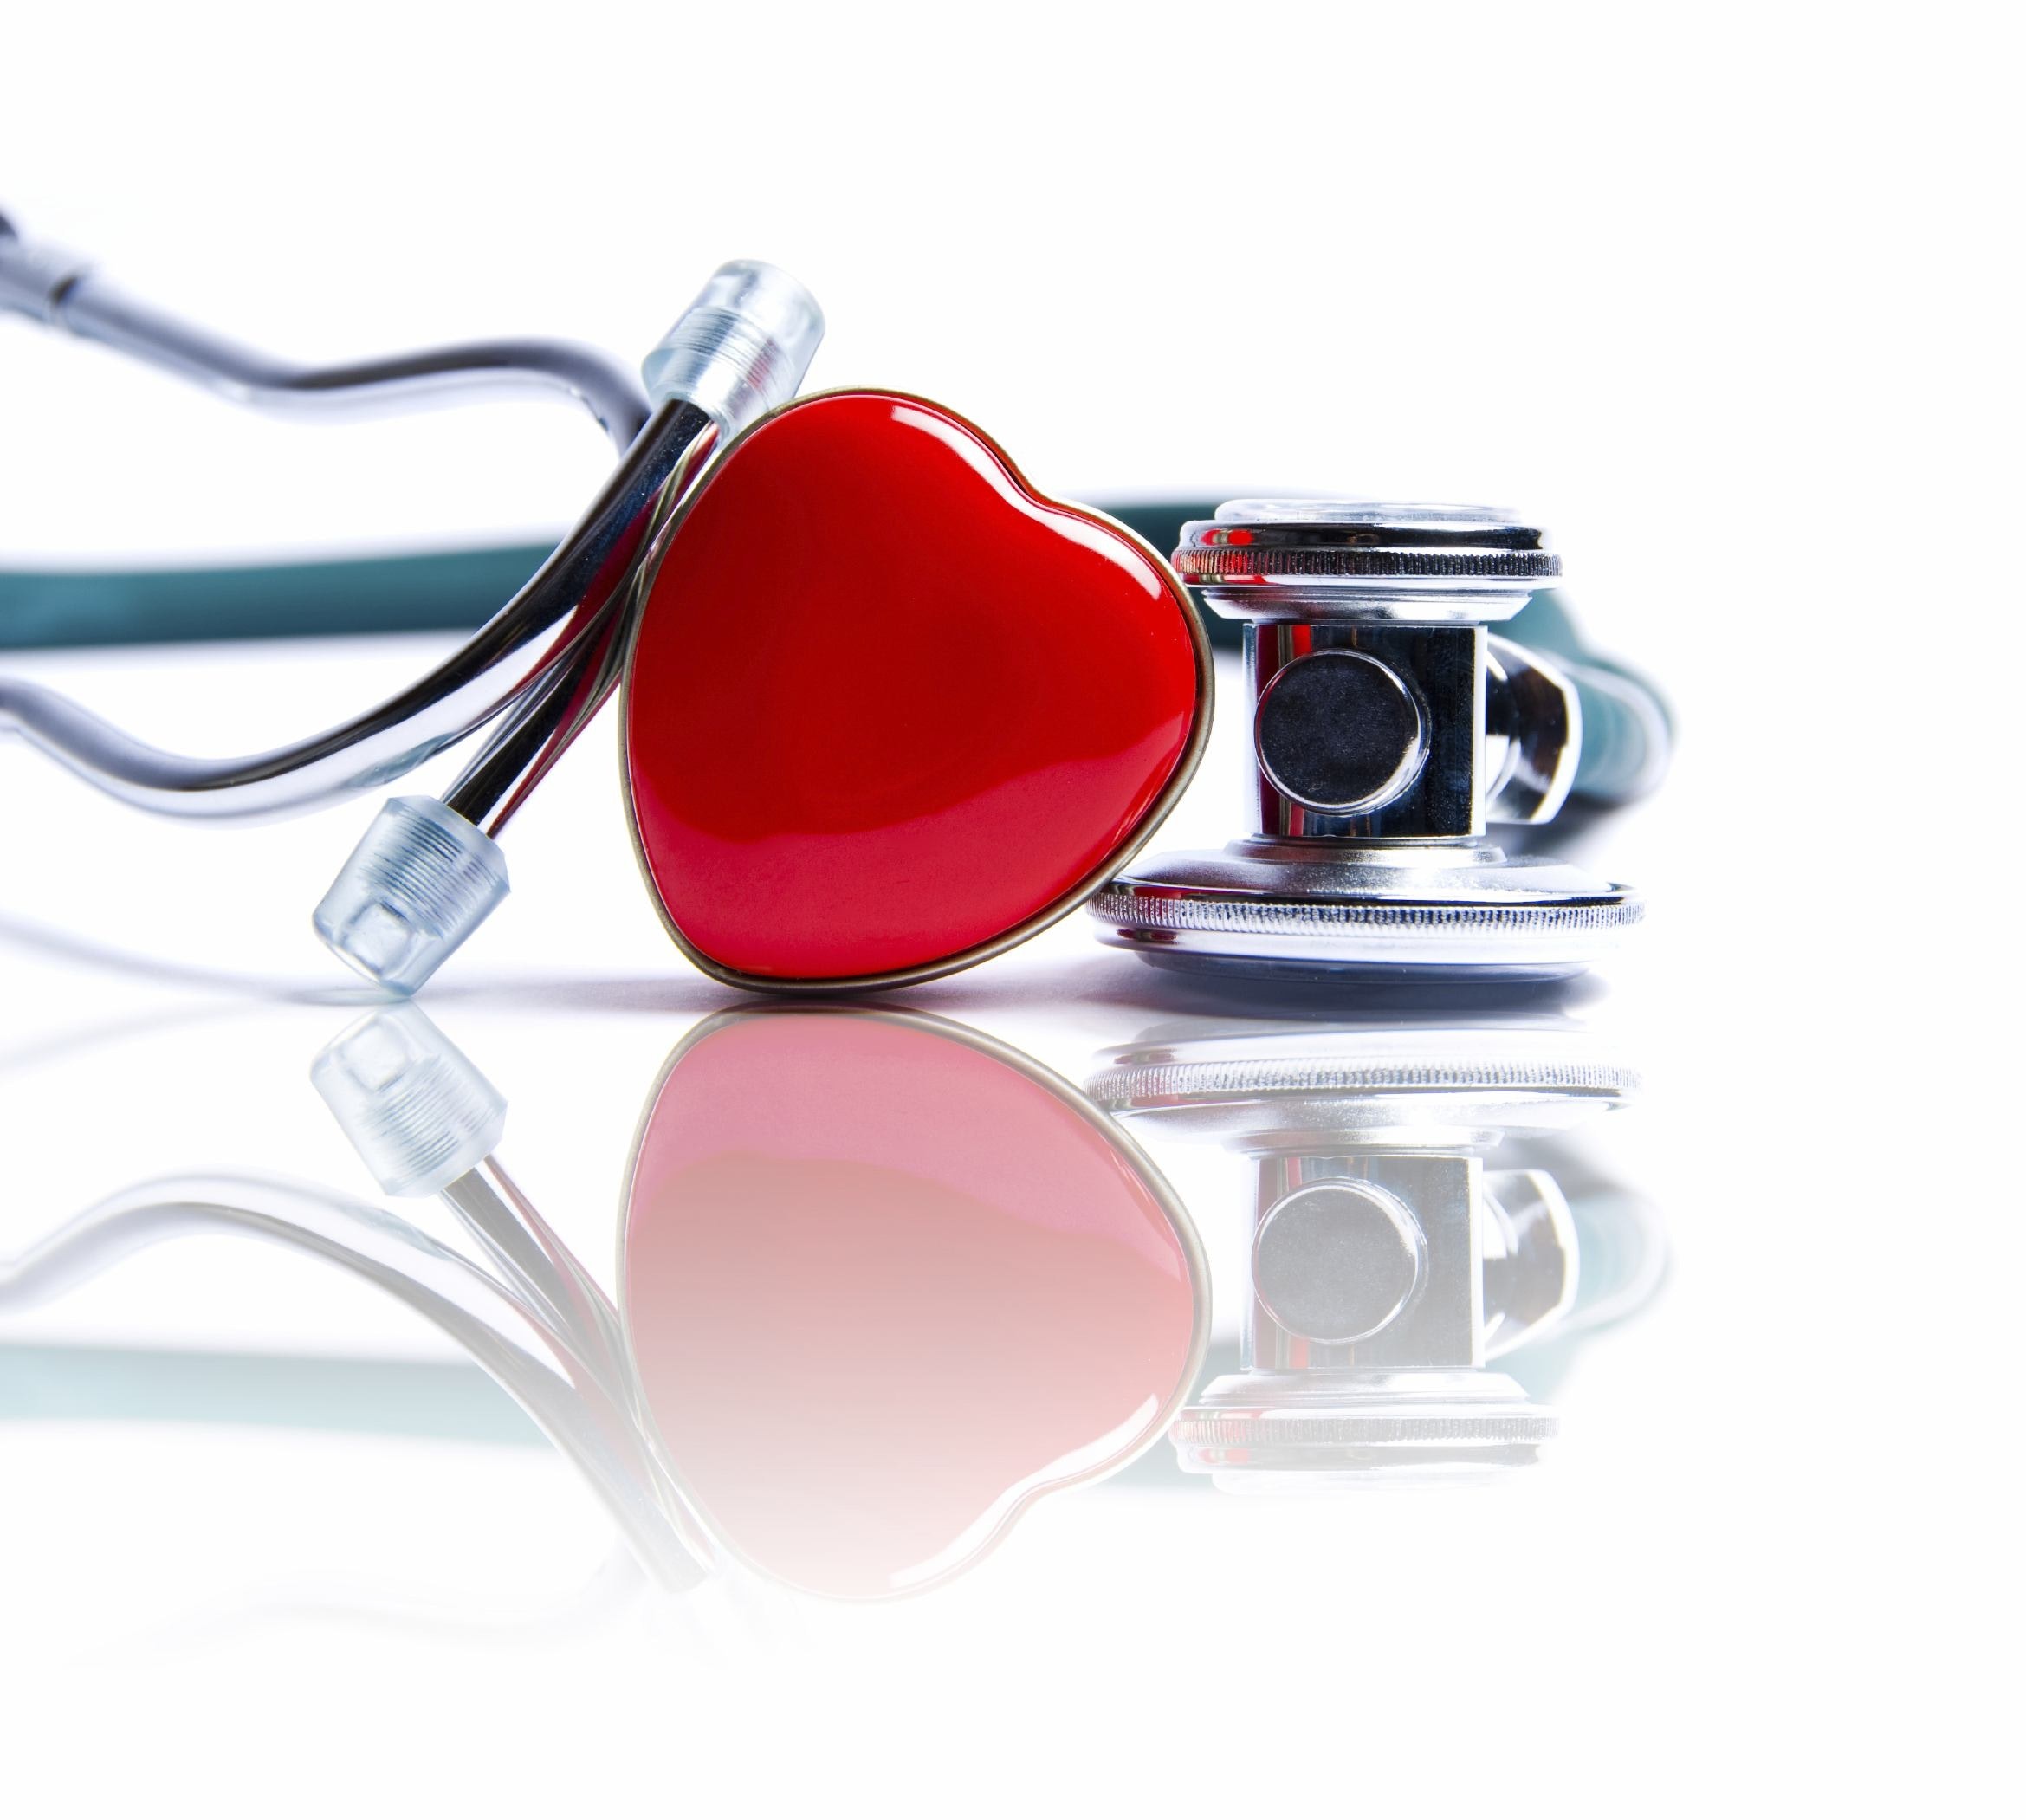 New Quality Measure Seeks to Optimize Cardiovascular Care for African Americans